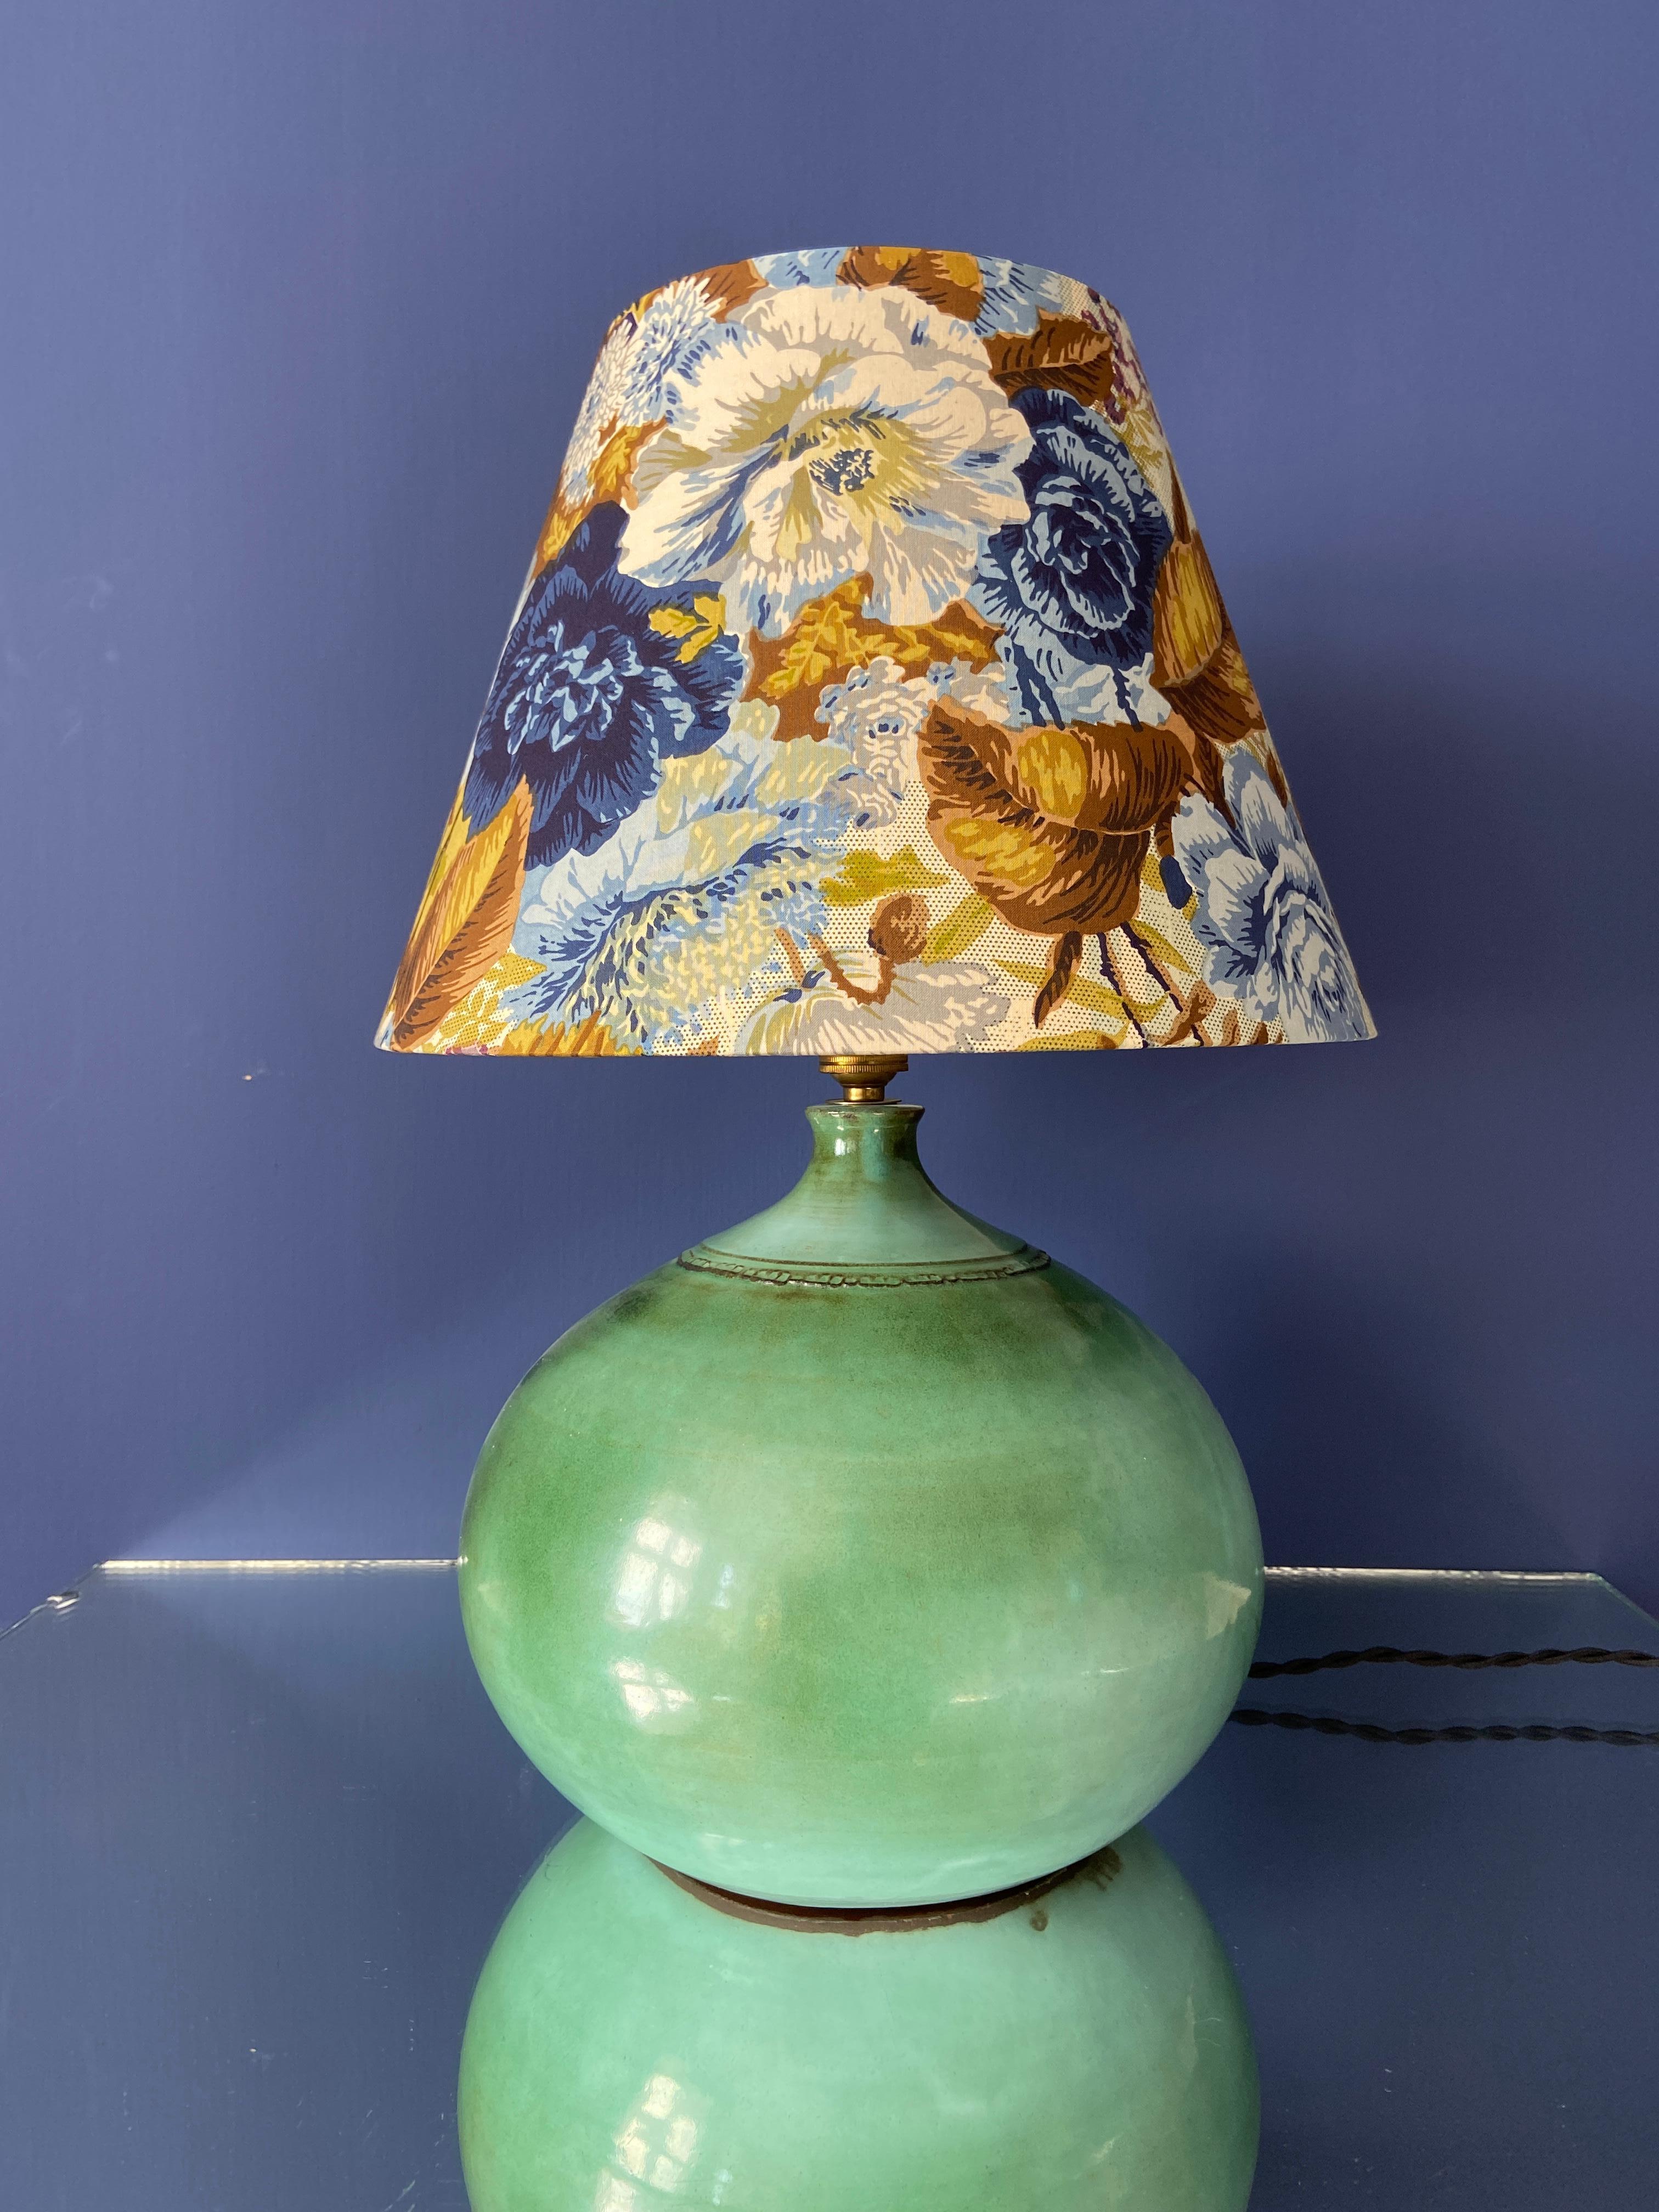 France, 1970's

Ceramic table lamp with customized shade.

Measures: H 35 x Ø 32 cm.